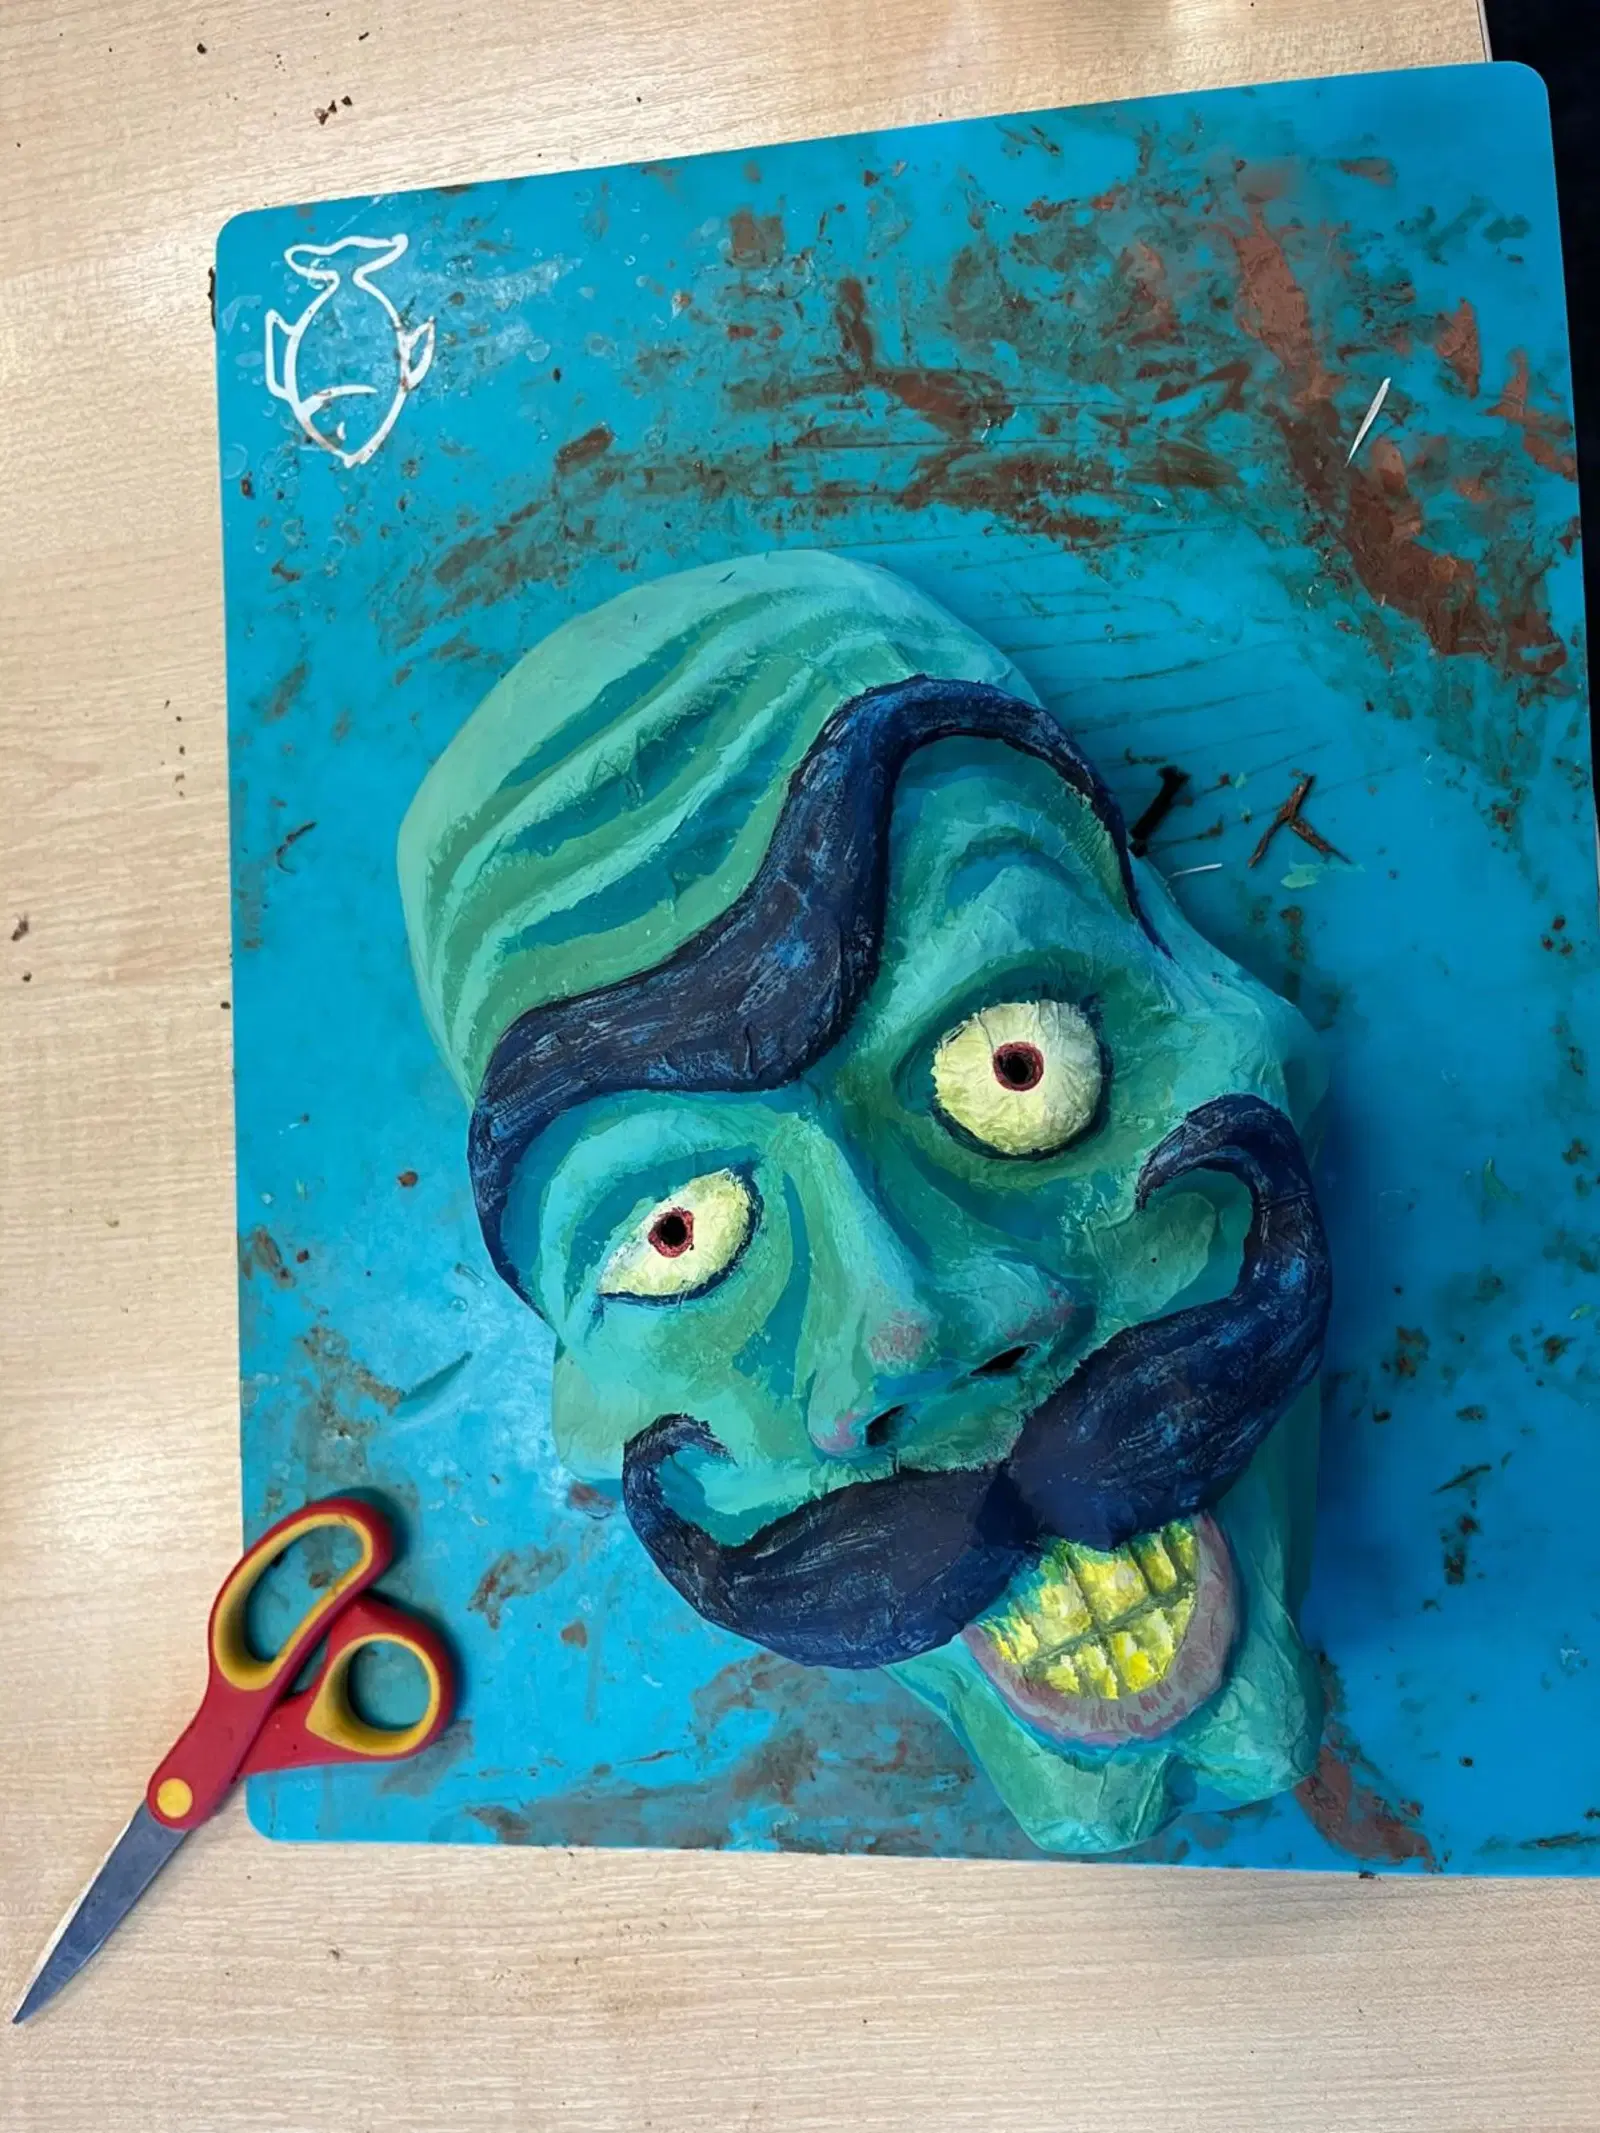 A vibrant clay sculpture of a caricatured face with exaggerated features, resting on a blue, paint-splattered workspace alongside a pair of scissors.